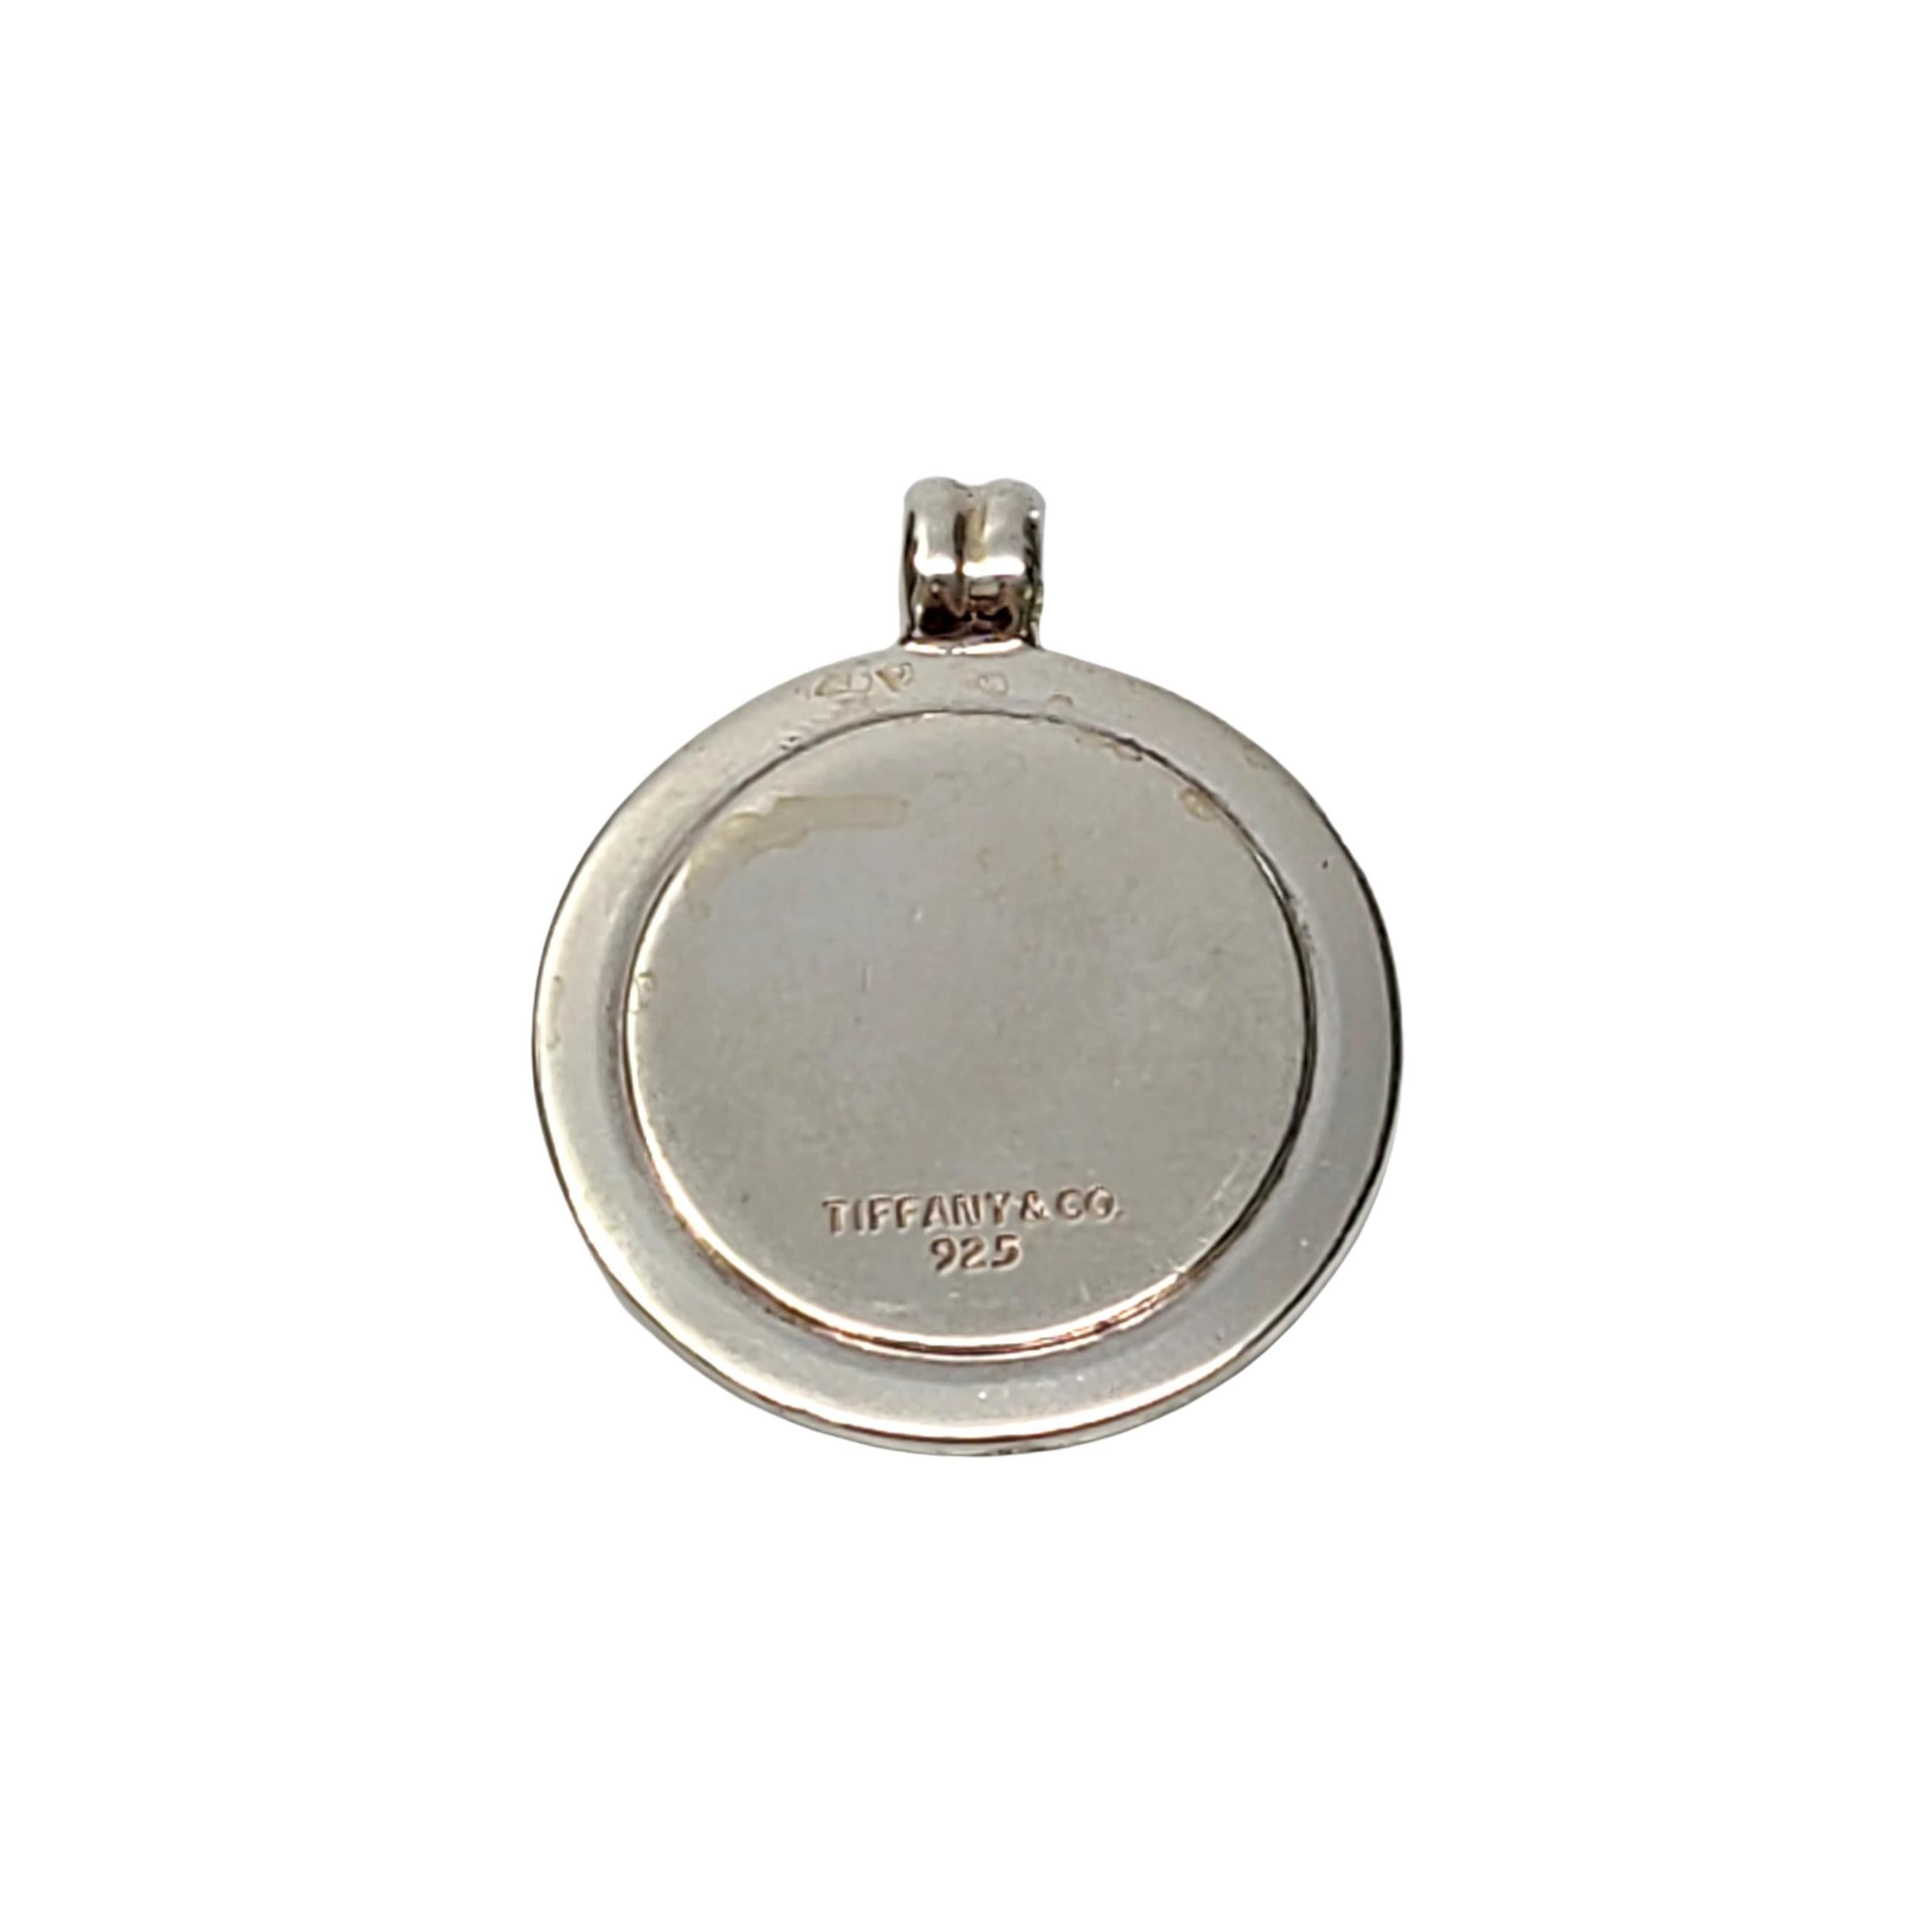 Tiffany & Co sterling silver and gold plated round disc pendant with vintage T&CO logo.

Authentic Tiffany sterling silver disc pendant with gold plated inner disc featuring the vintage T&CO logo. Does not include Tiffany & Co box or